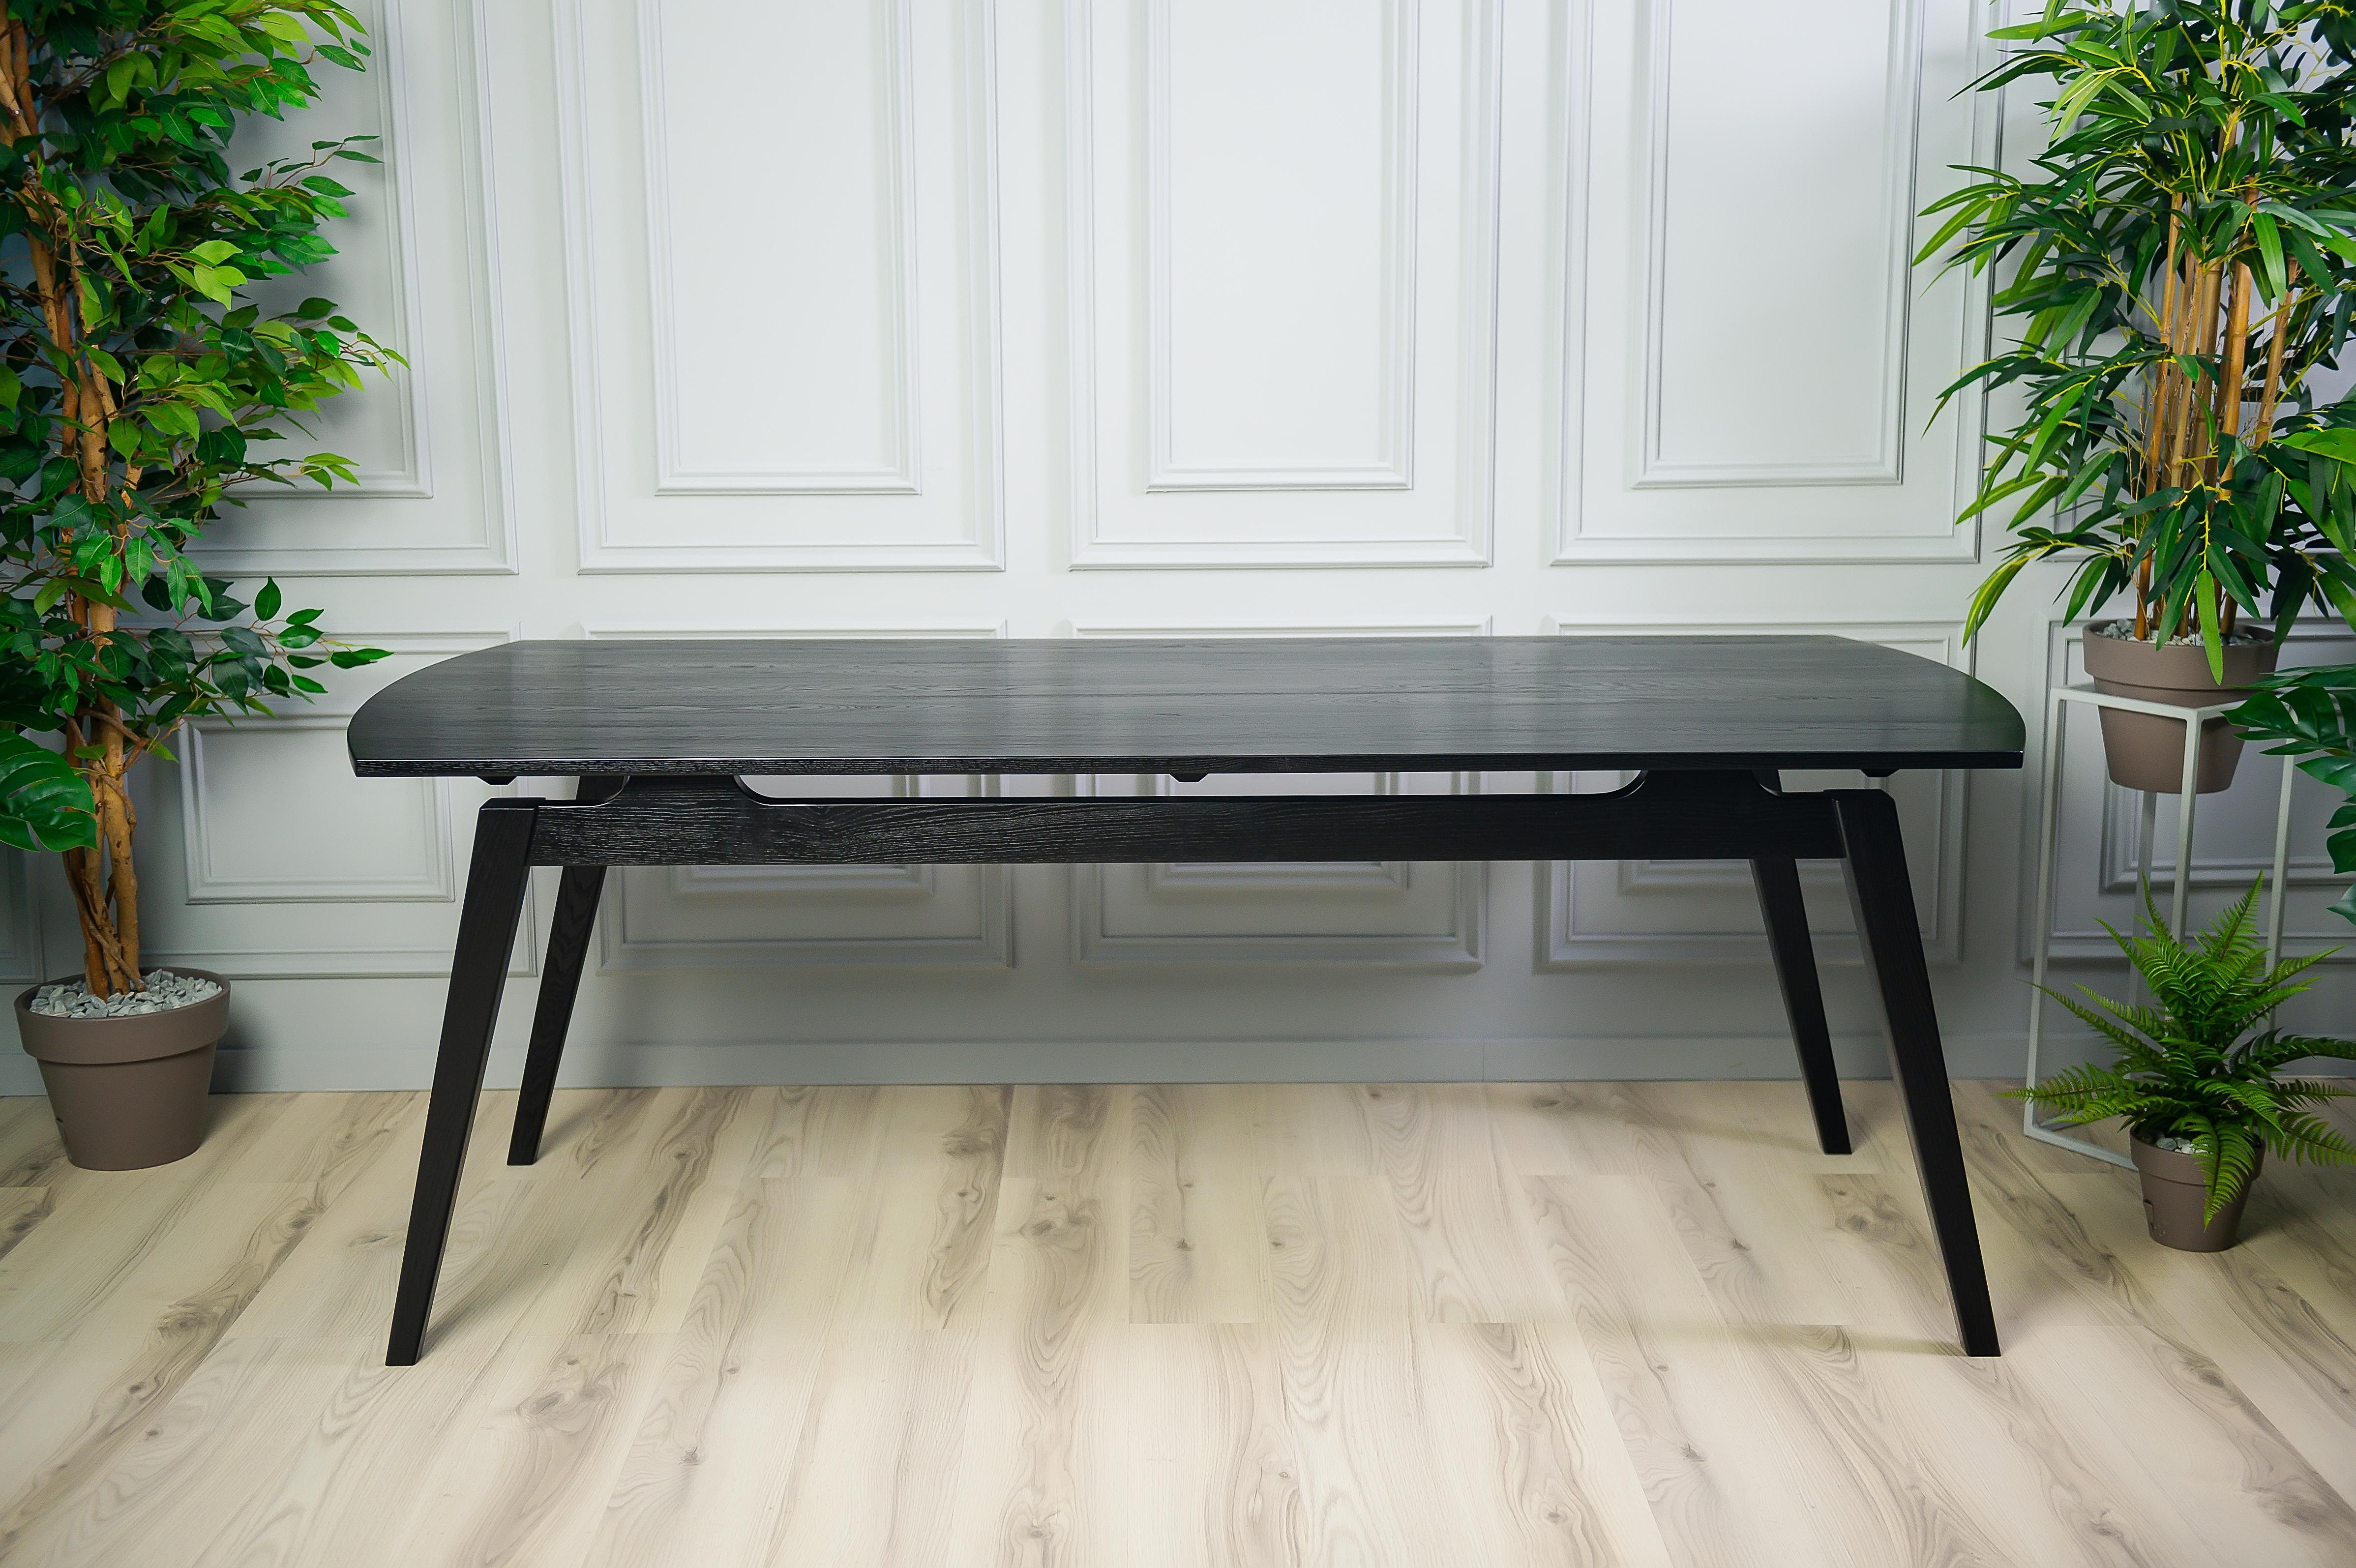 The Acline Dining Table offers a unique presentation that delivers a spacious yet elegant dining experience. The angle and trim of this table allow for a Mid-Century Modern expression that can fit into any home. With plenty of options for seating,